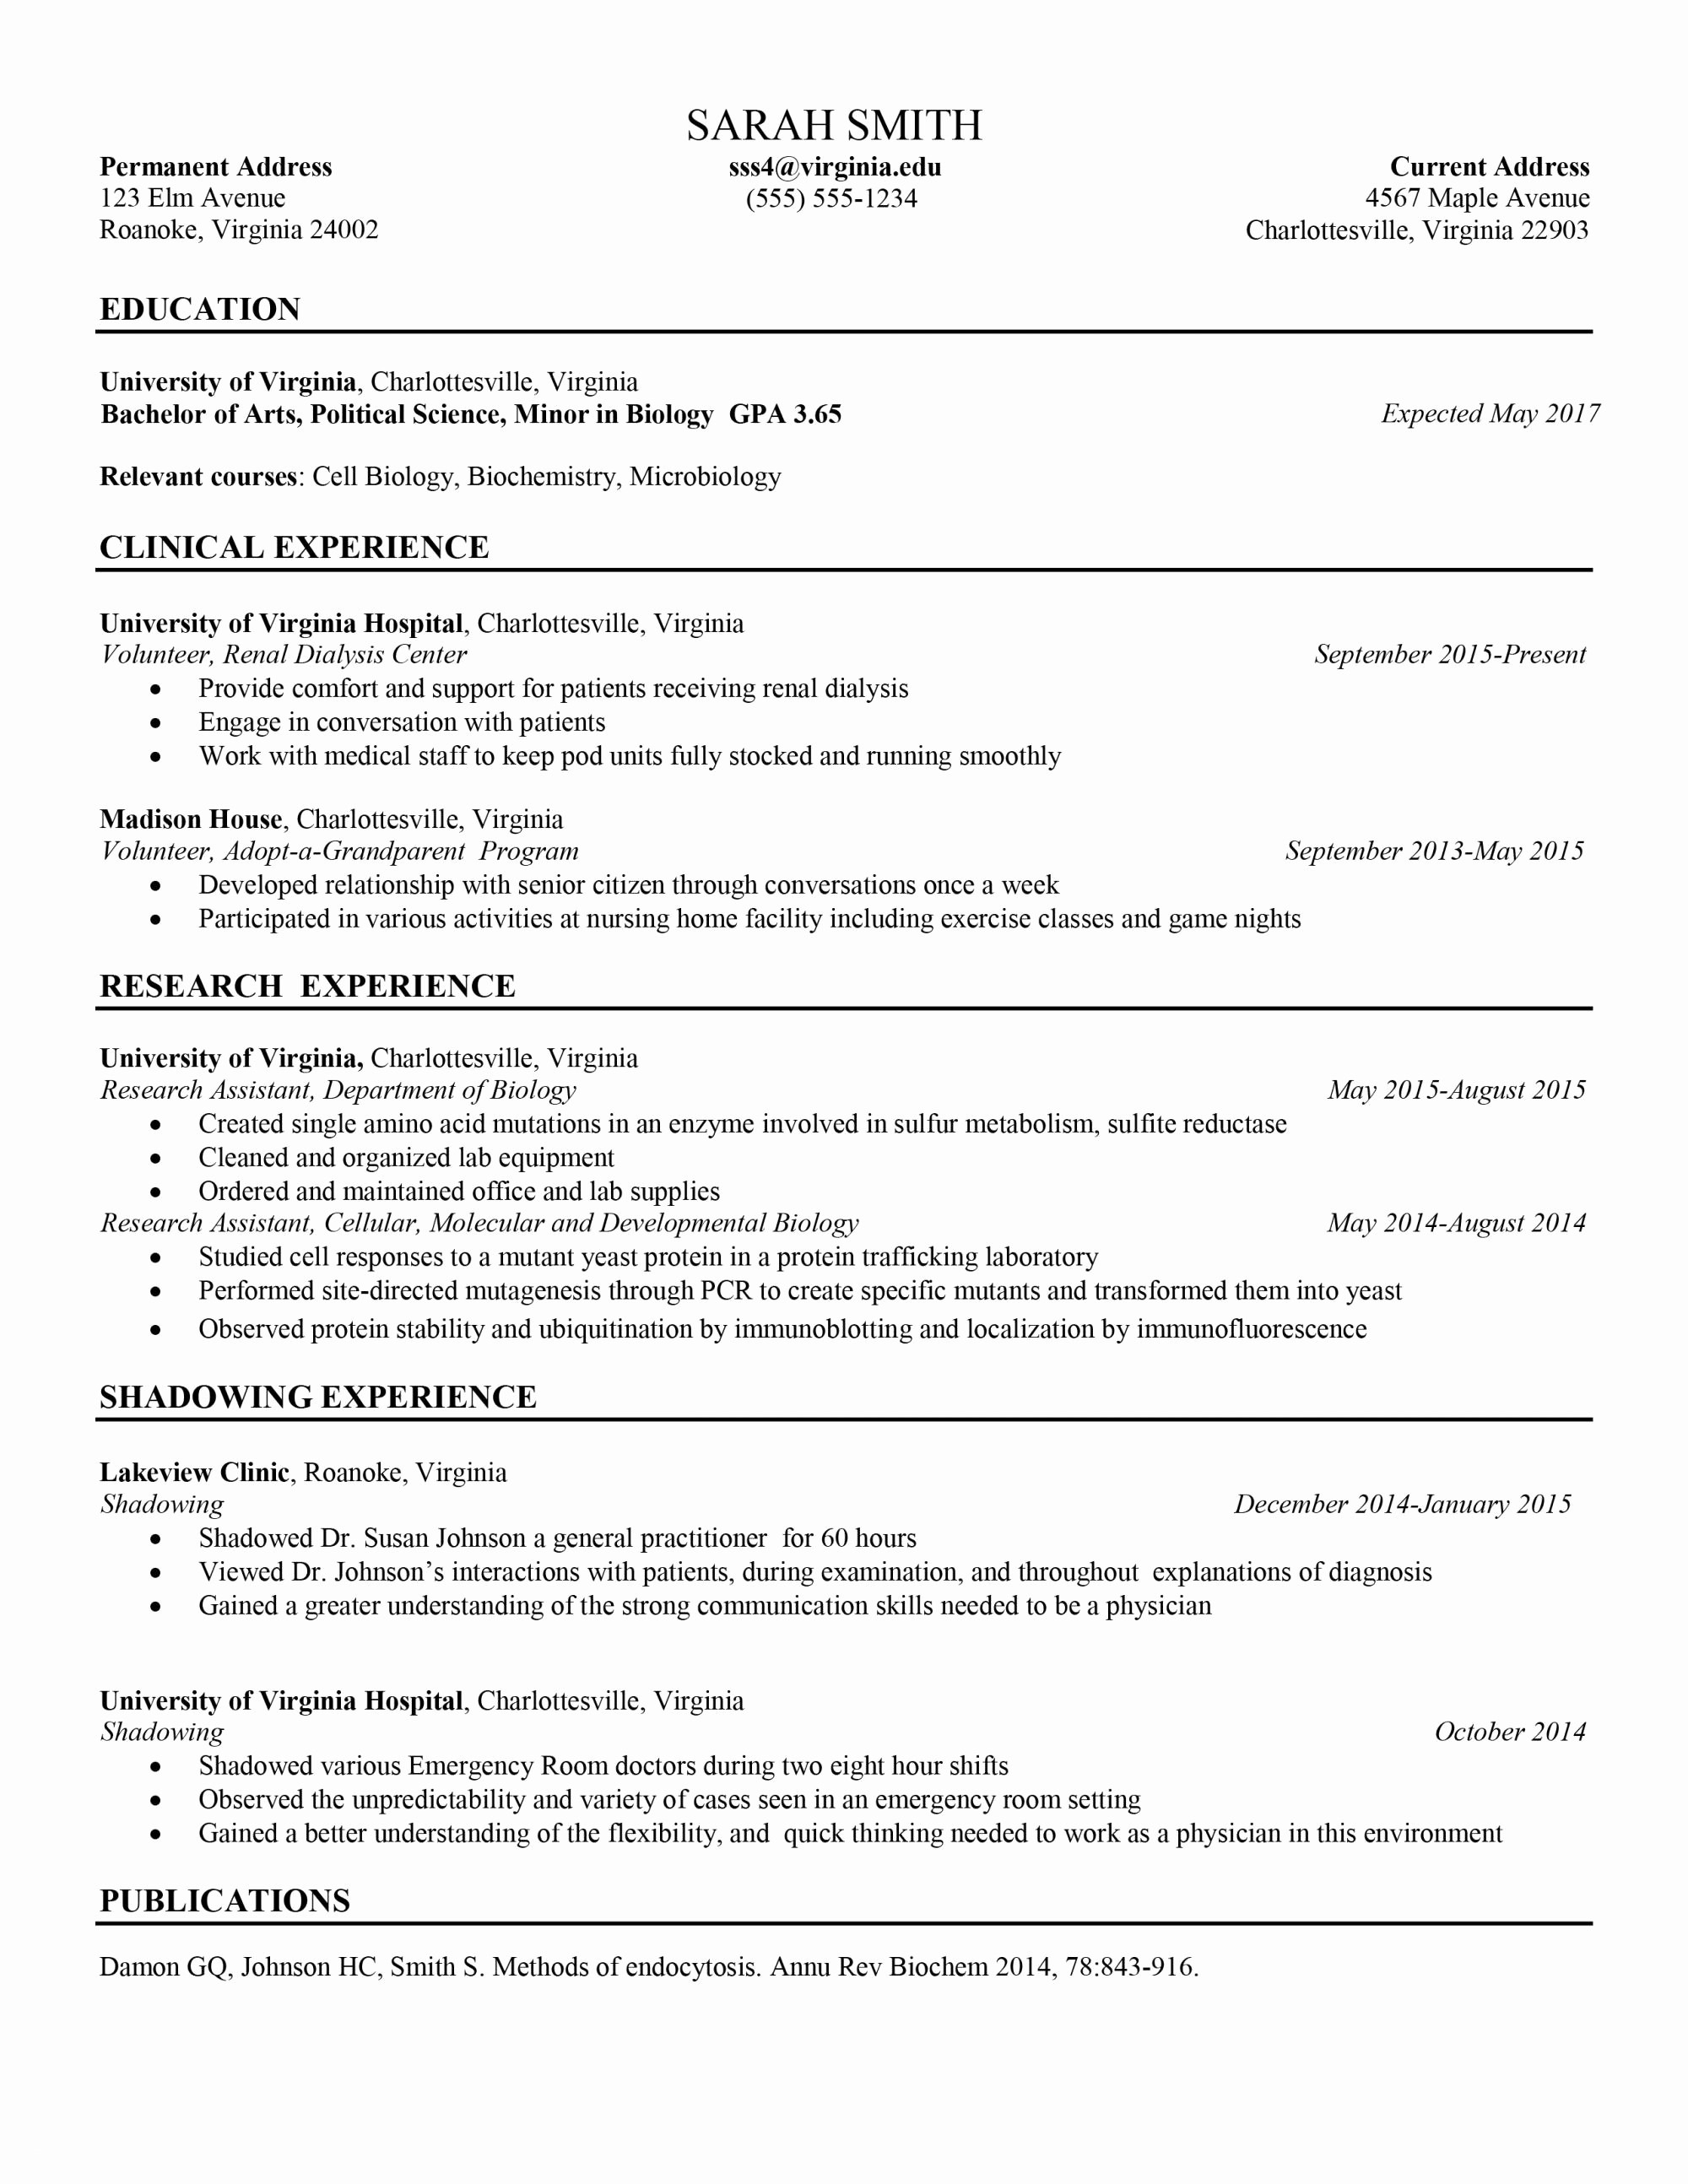 General Cover Letter Template Free - Fire Fighter Resume Unique Editor Resume Sample 29 Od Specialist